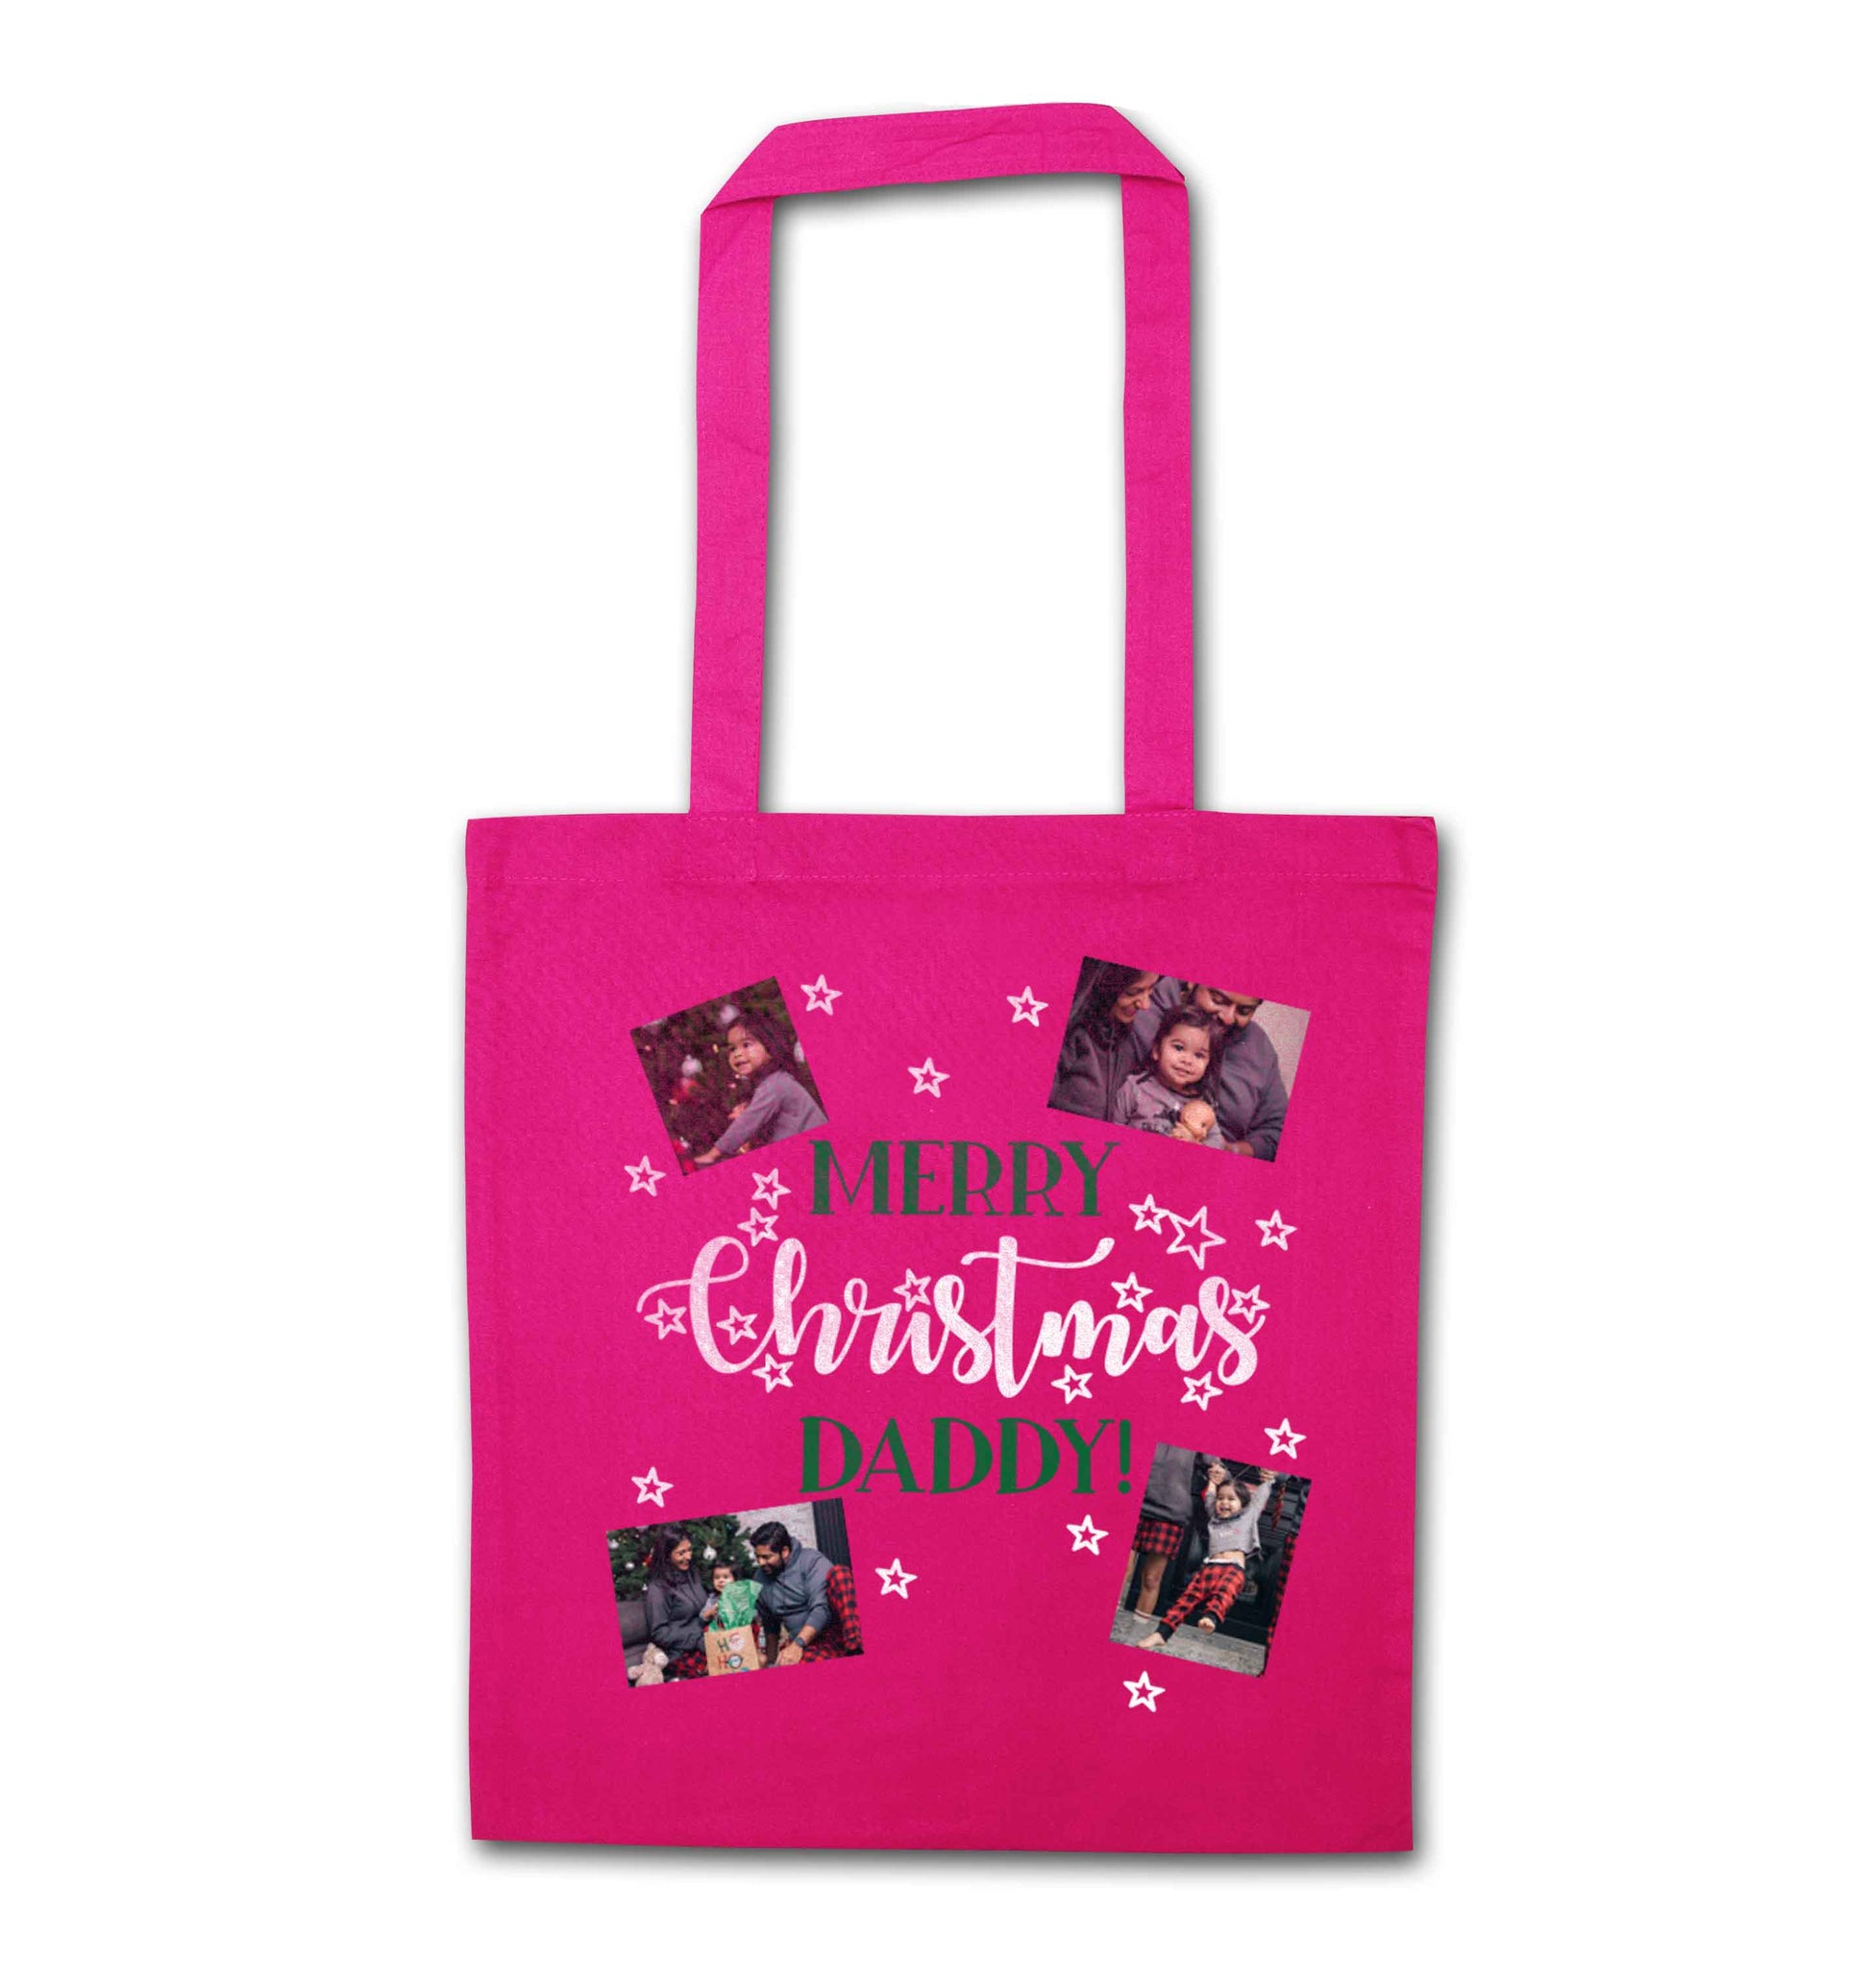 Merry Christmas daddy pink tote bag